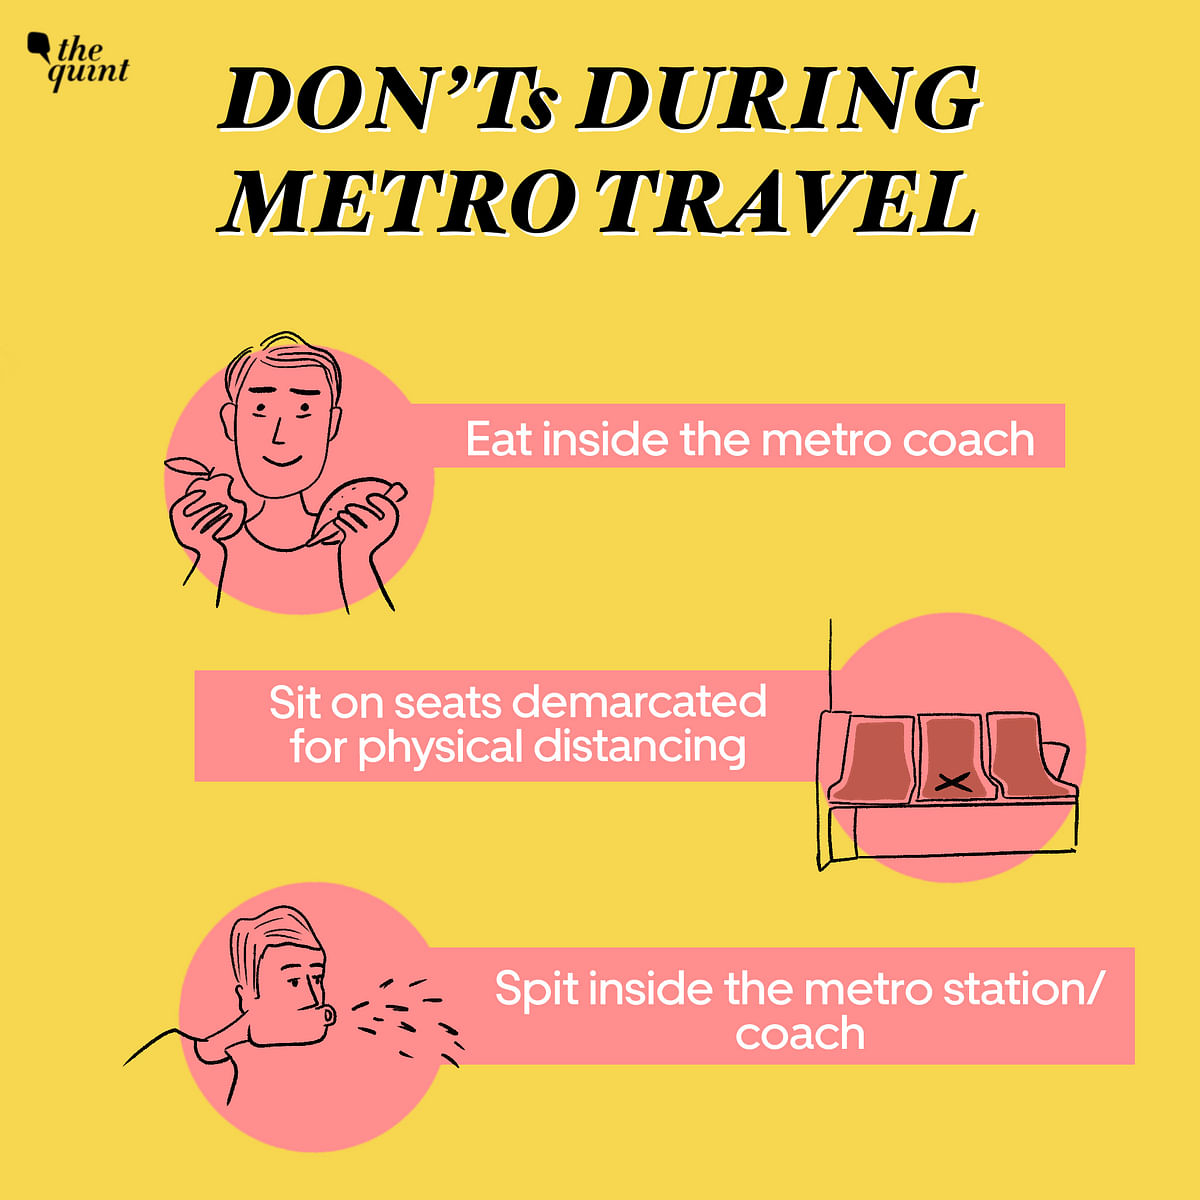 Wear Face Mask, Don’t Skip Lines: Dos & Don’ts During Metro Travel